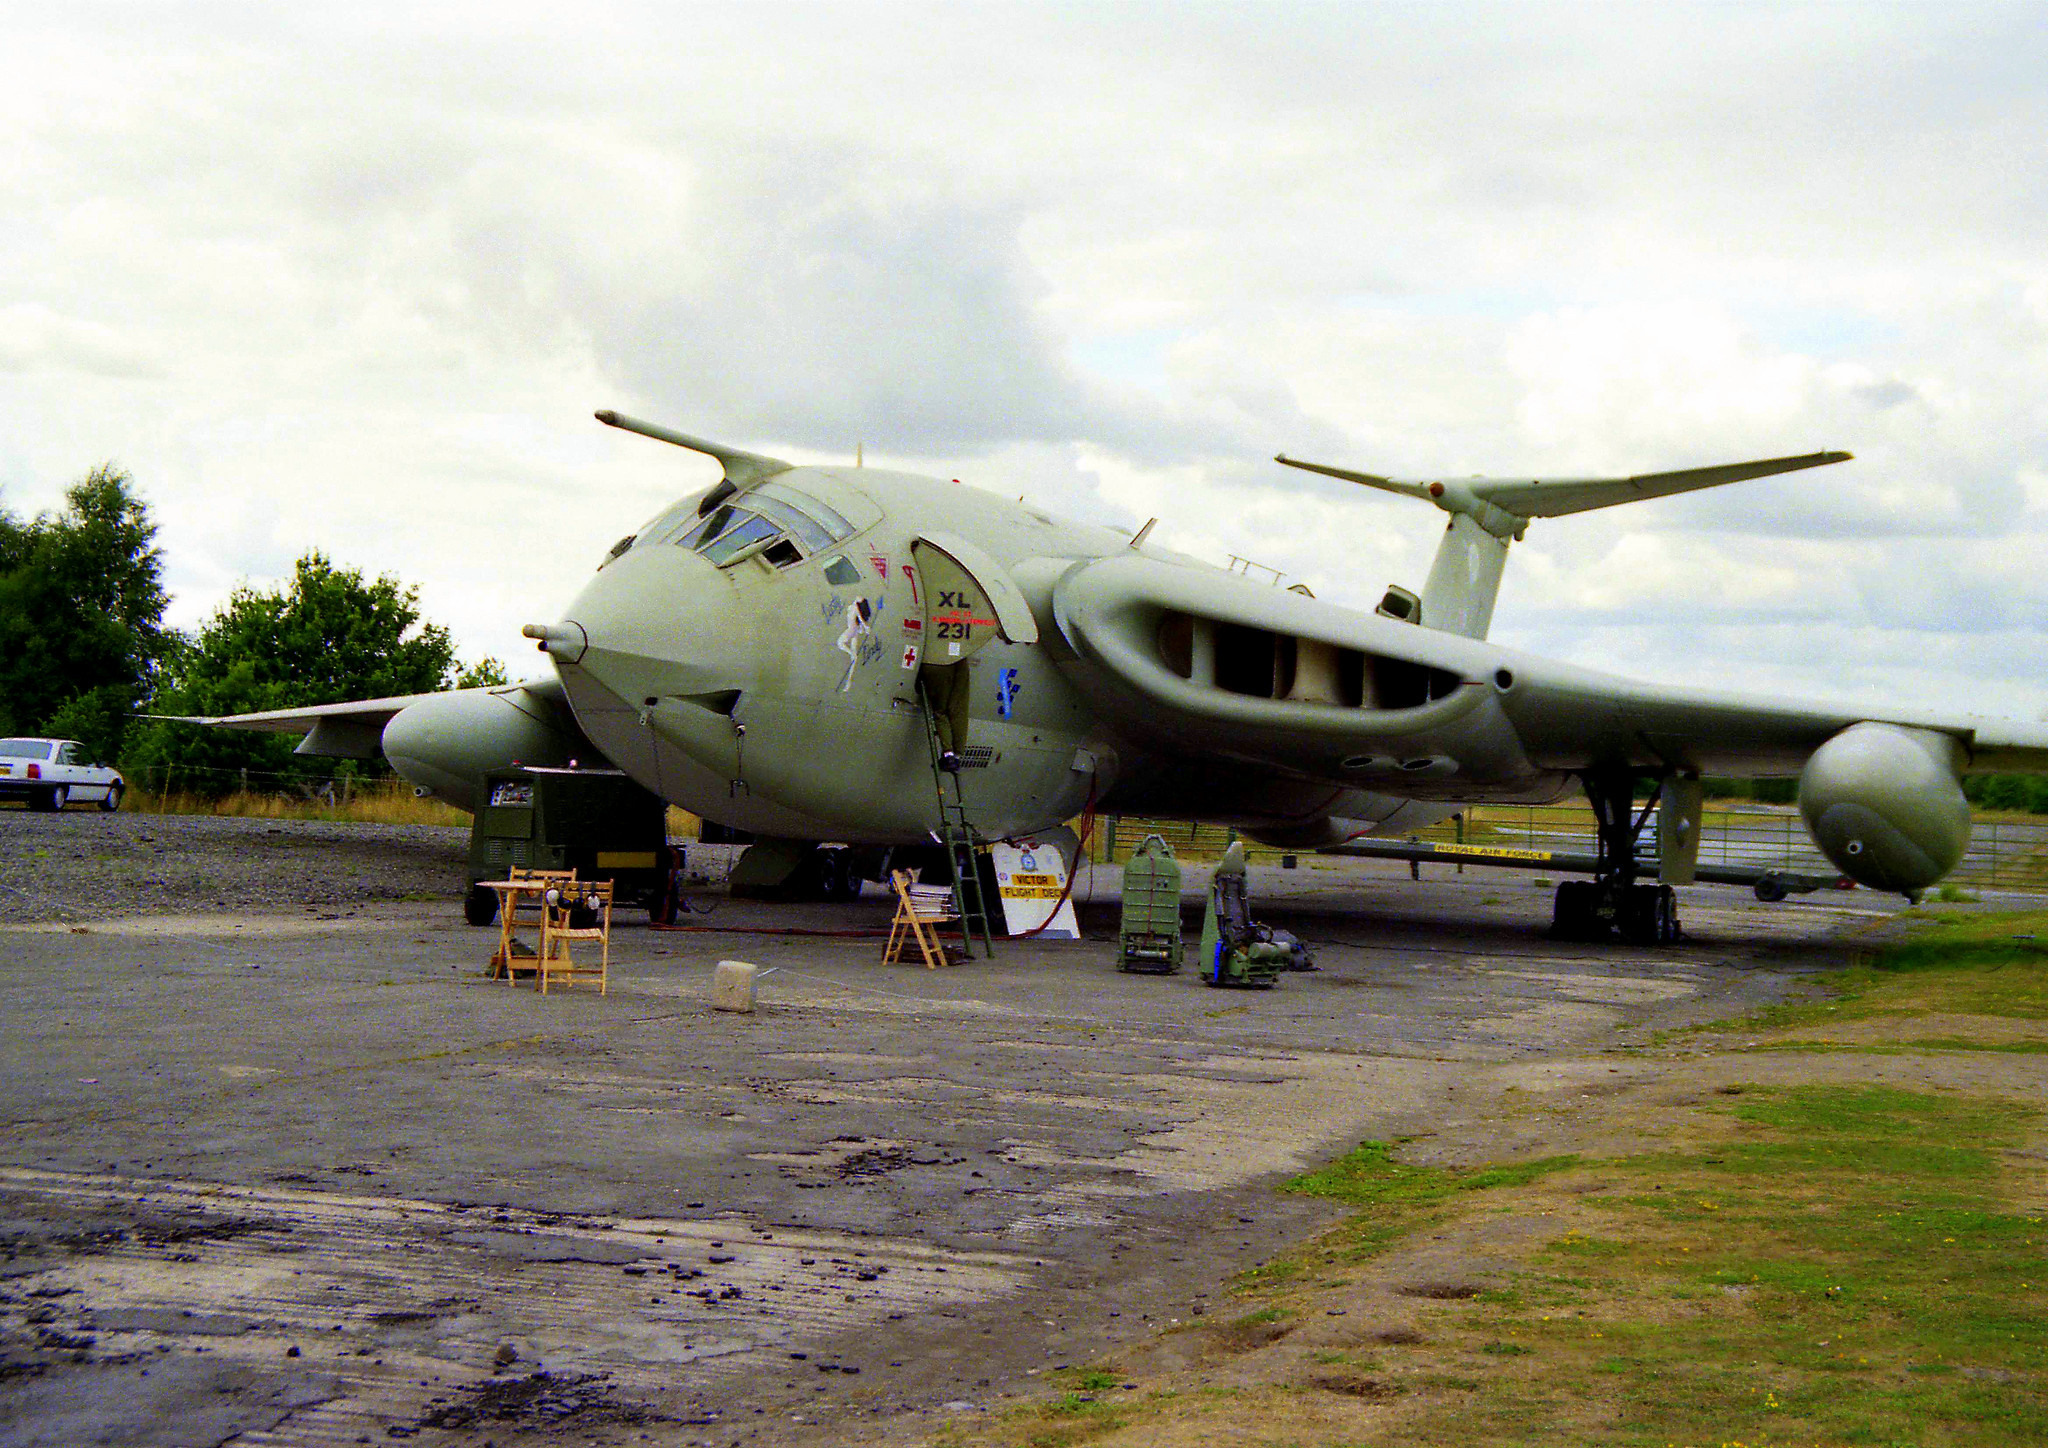 A Handley Page Victor aircraft on display at the Yorkshire Air Museum